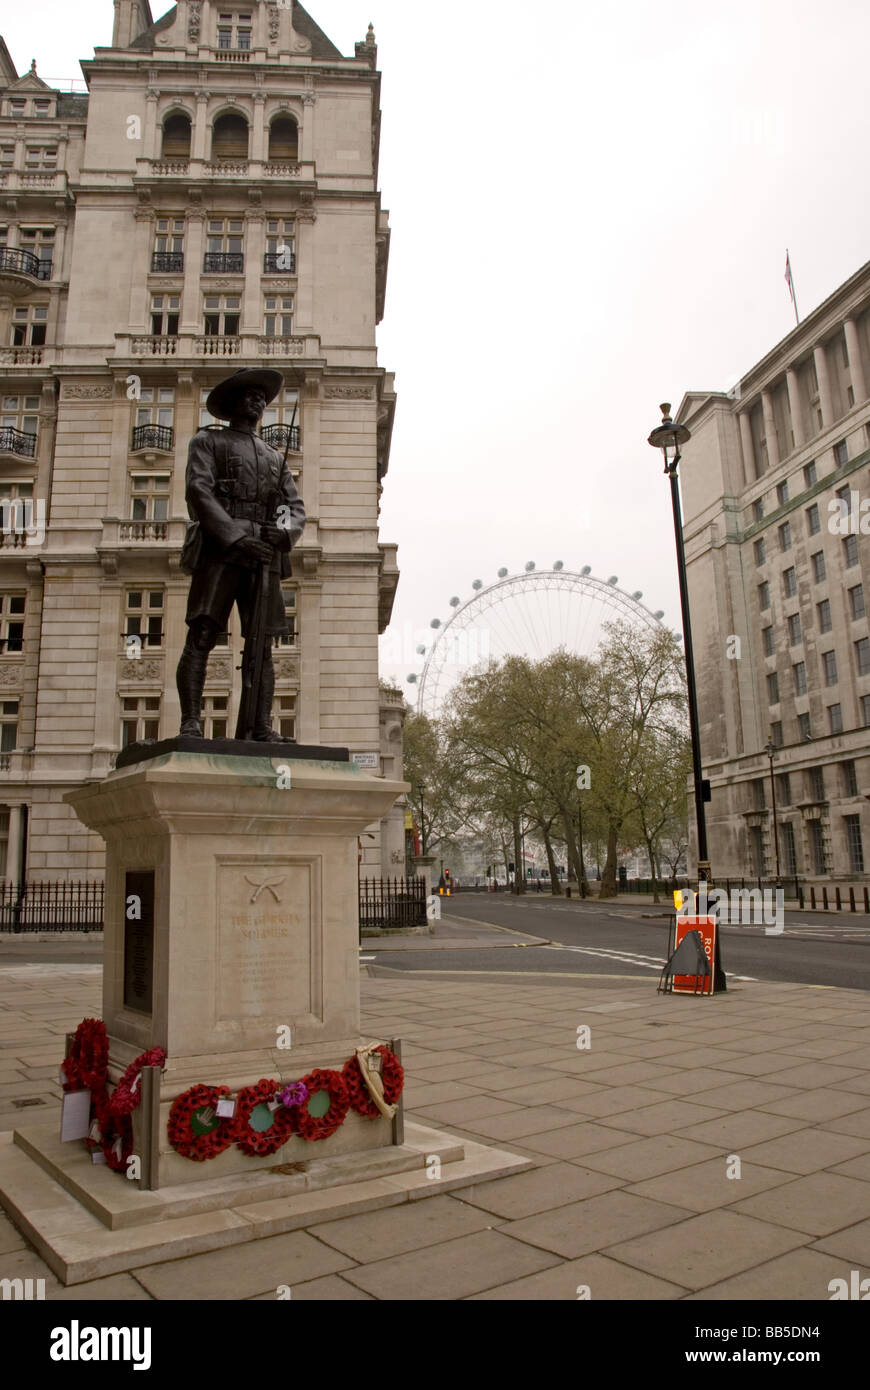 Statue of a Gurkha soldier near Ministry of Defence, City of Westminster, London Stock Photo